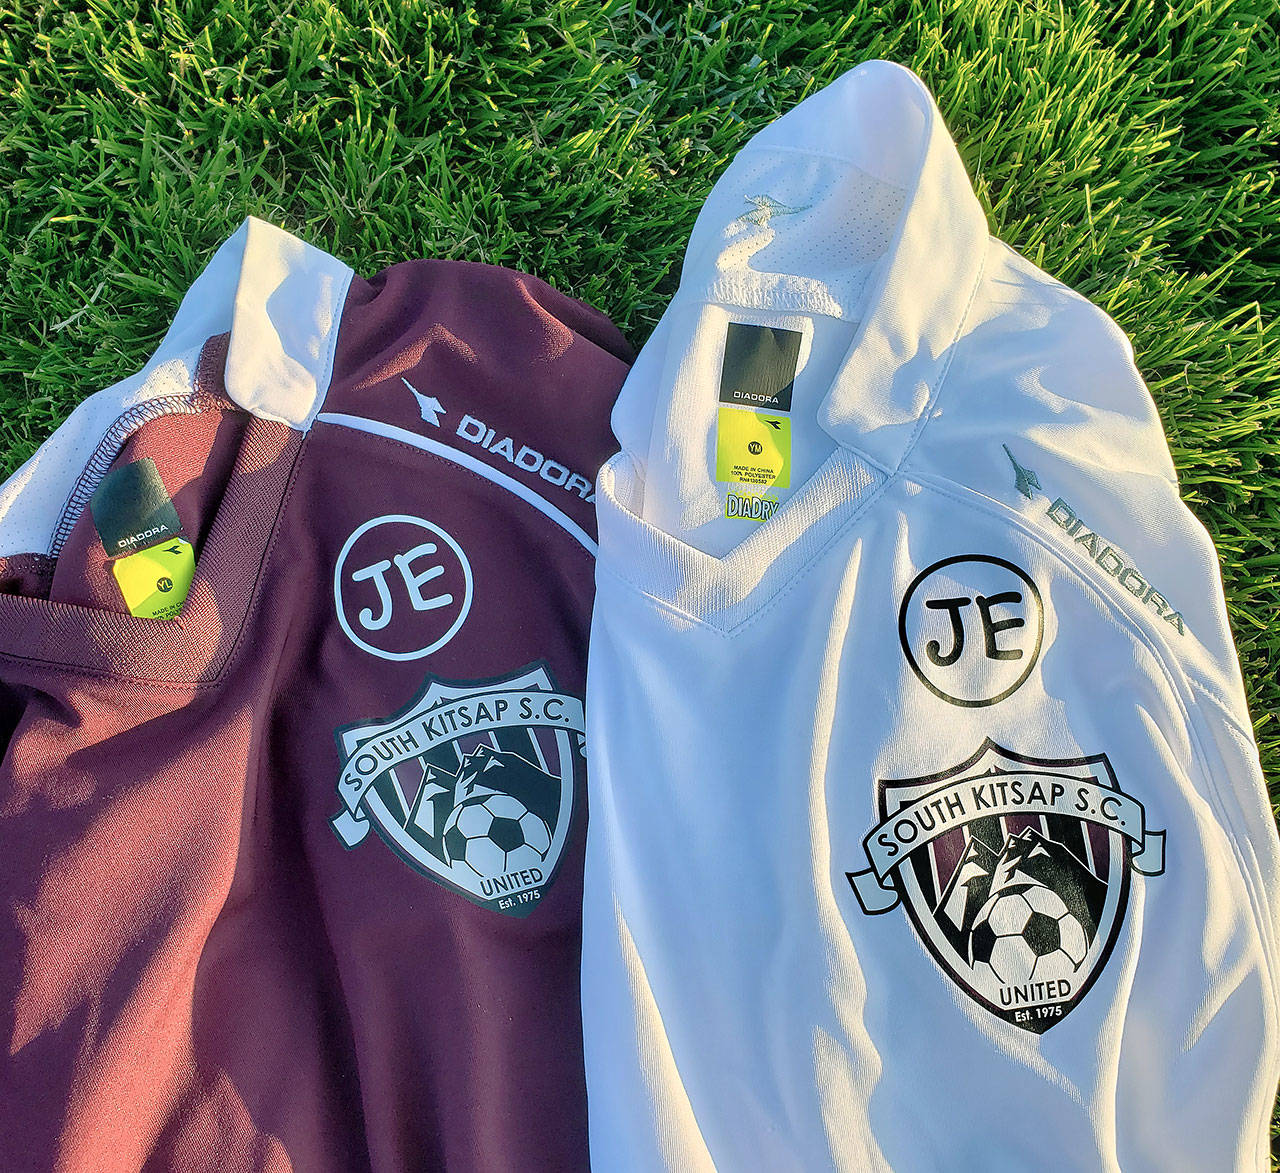 Photo courtesy of David Eyre                                The patch featuring Jesse Eyre’s initials, which will be worn by the South Kitsap United ’06 Boys team this season.